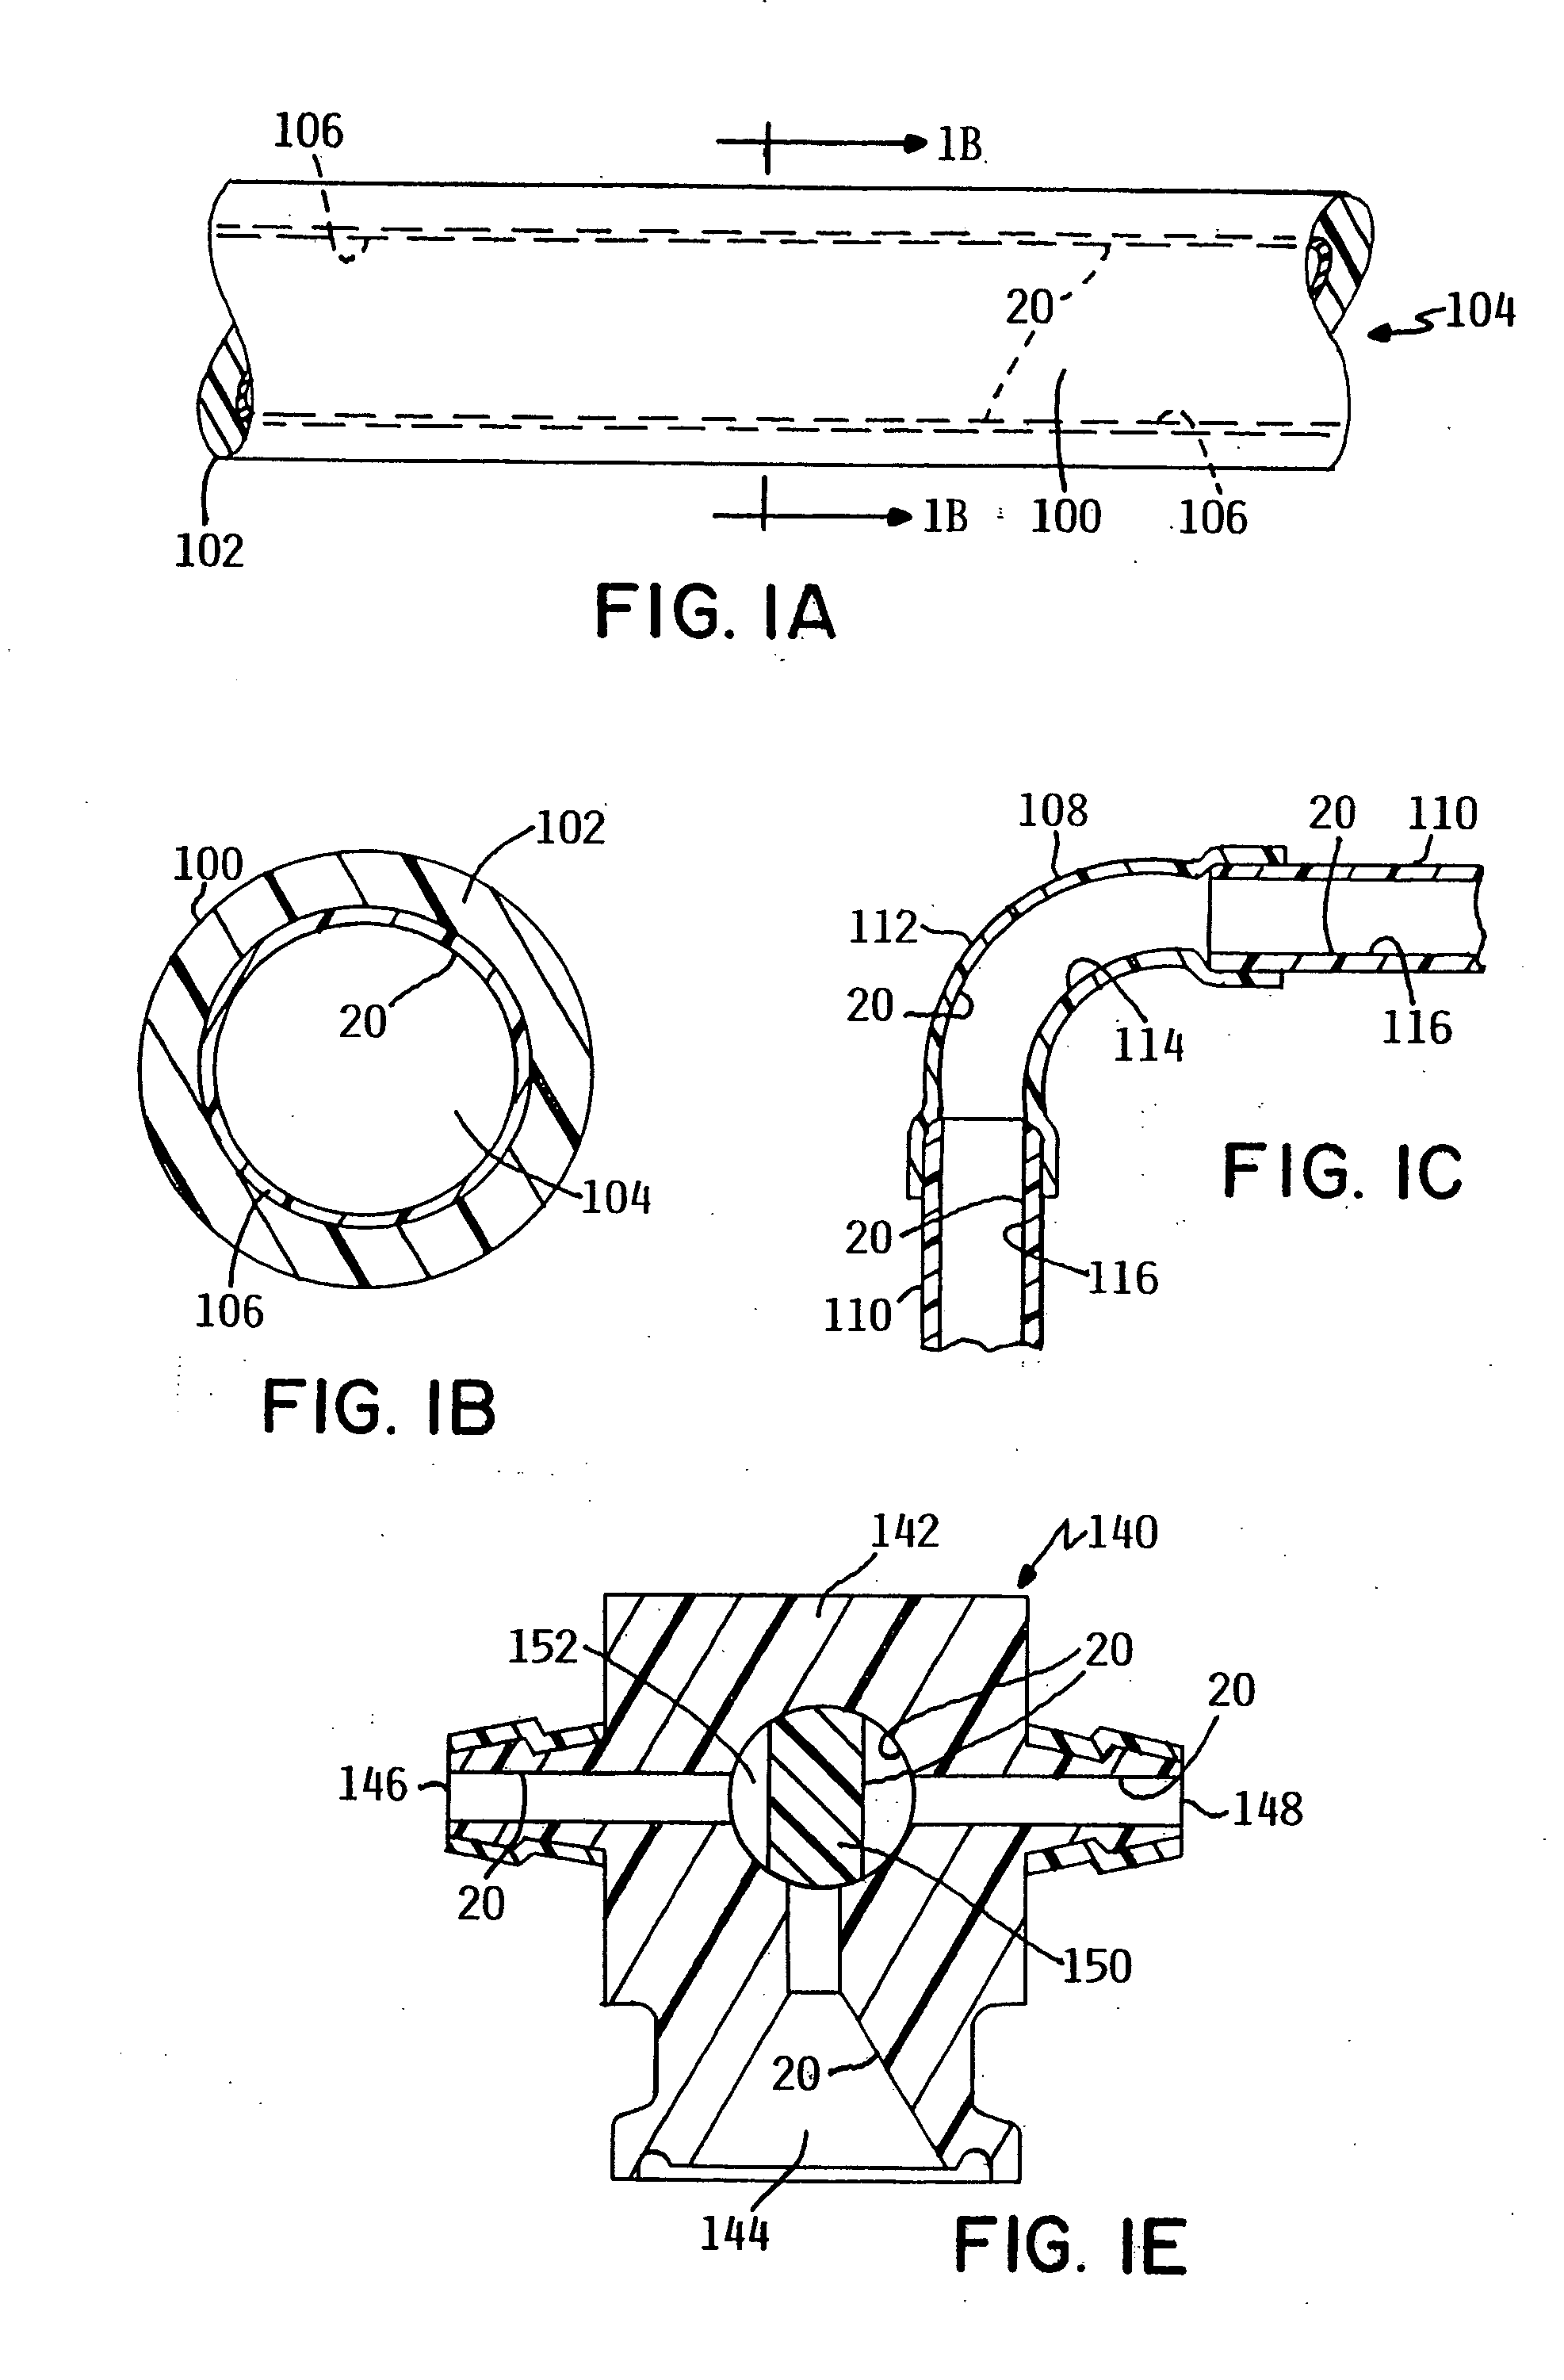 Fluid handling component with ultraphobic surfaces